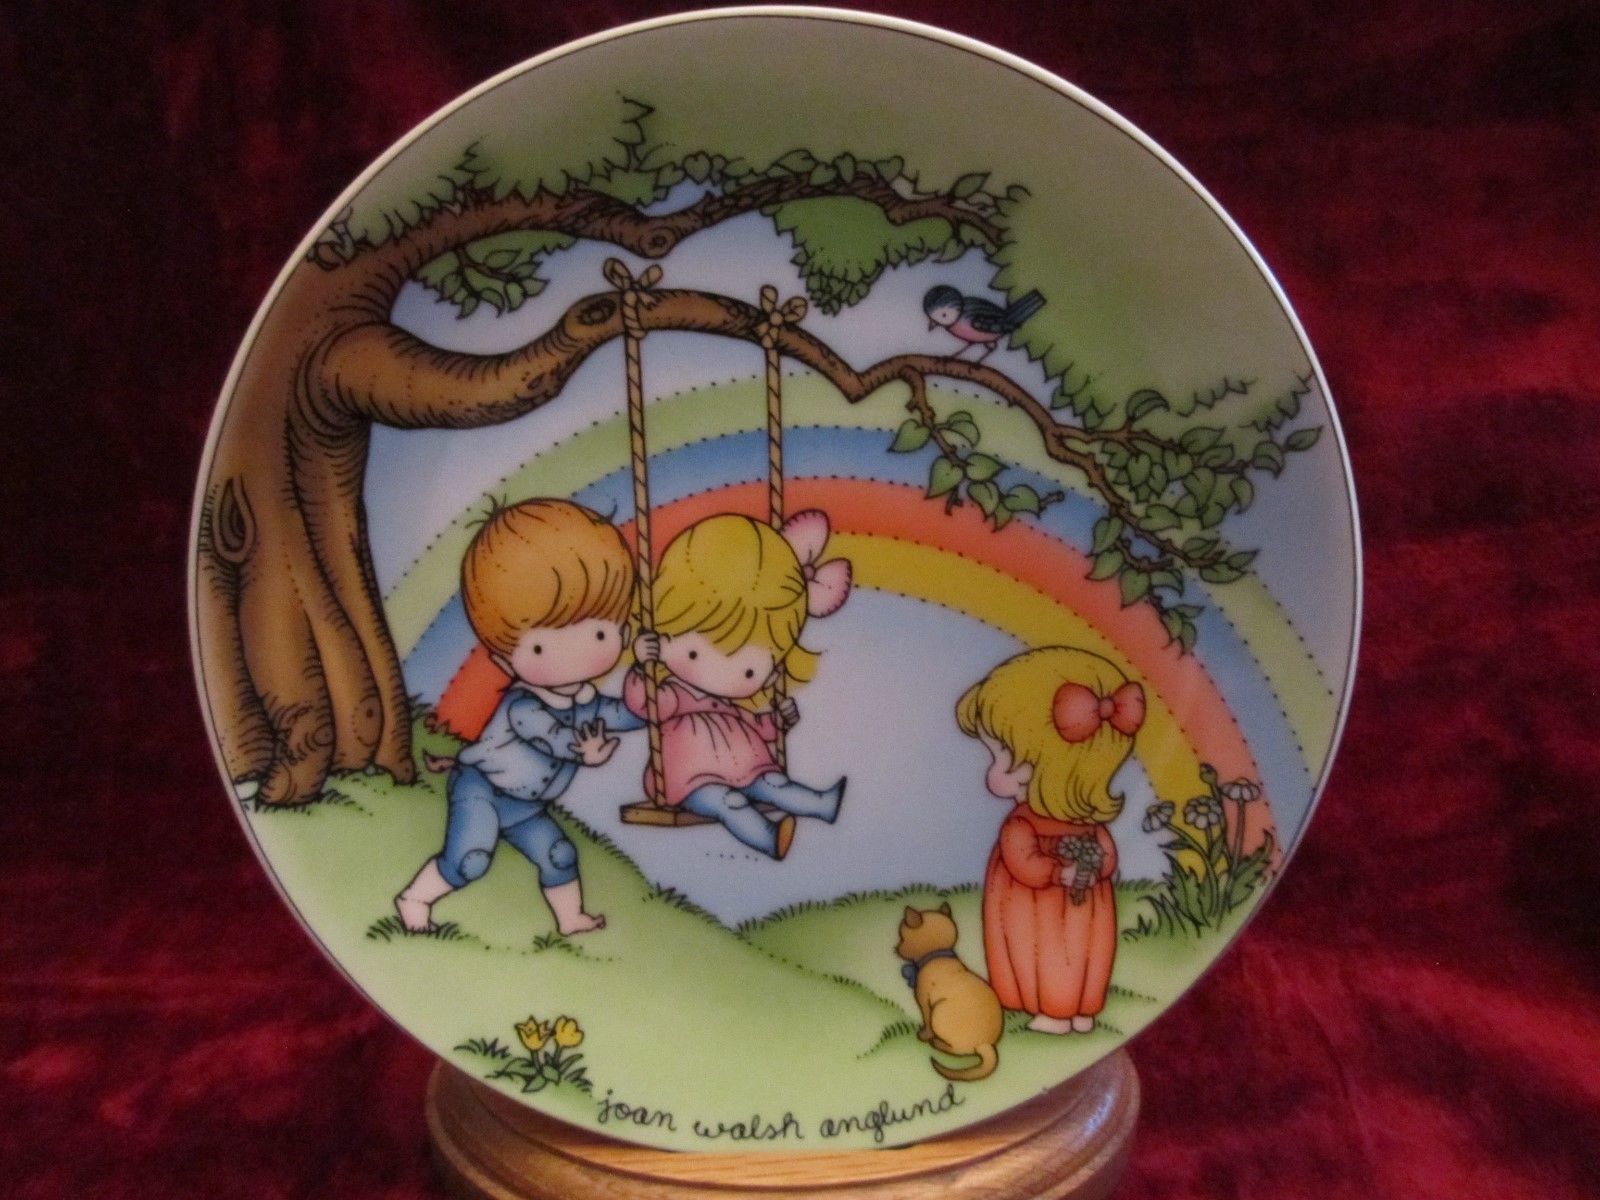 MAKE EACH DAY A RAINBOW collector plate JOAN WALSH ANGLUND - $6.89